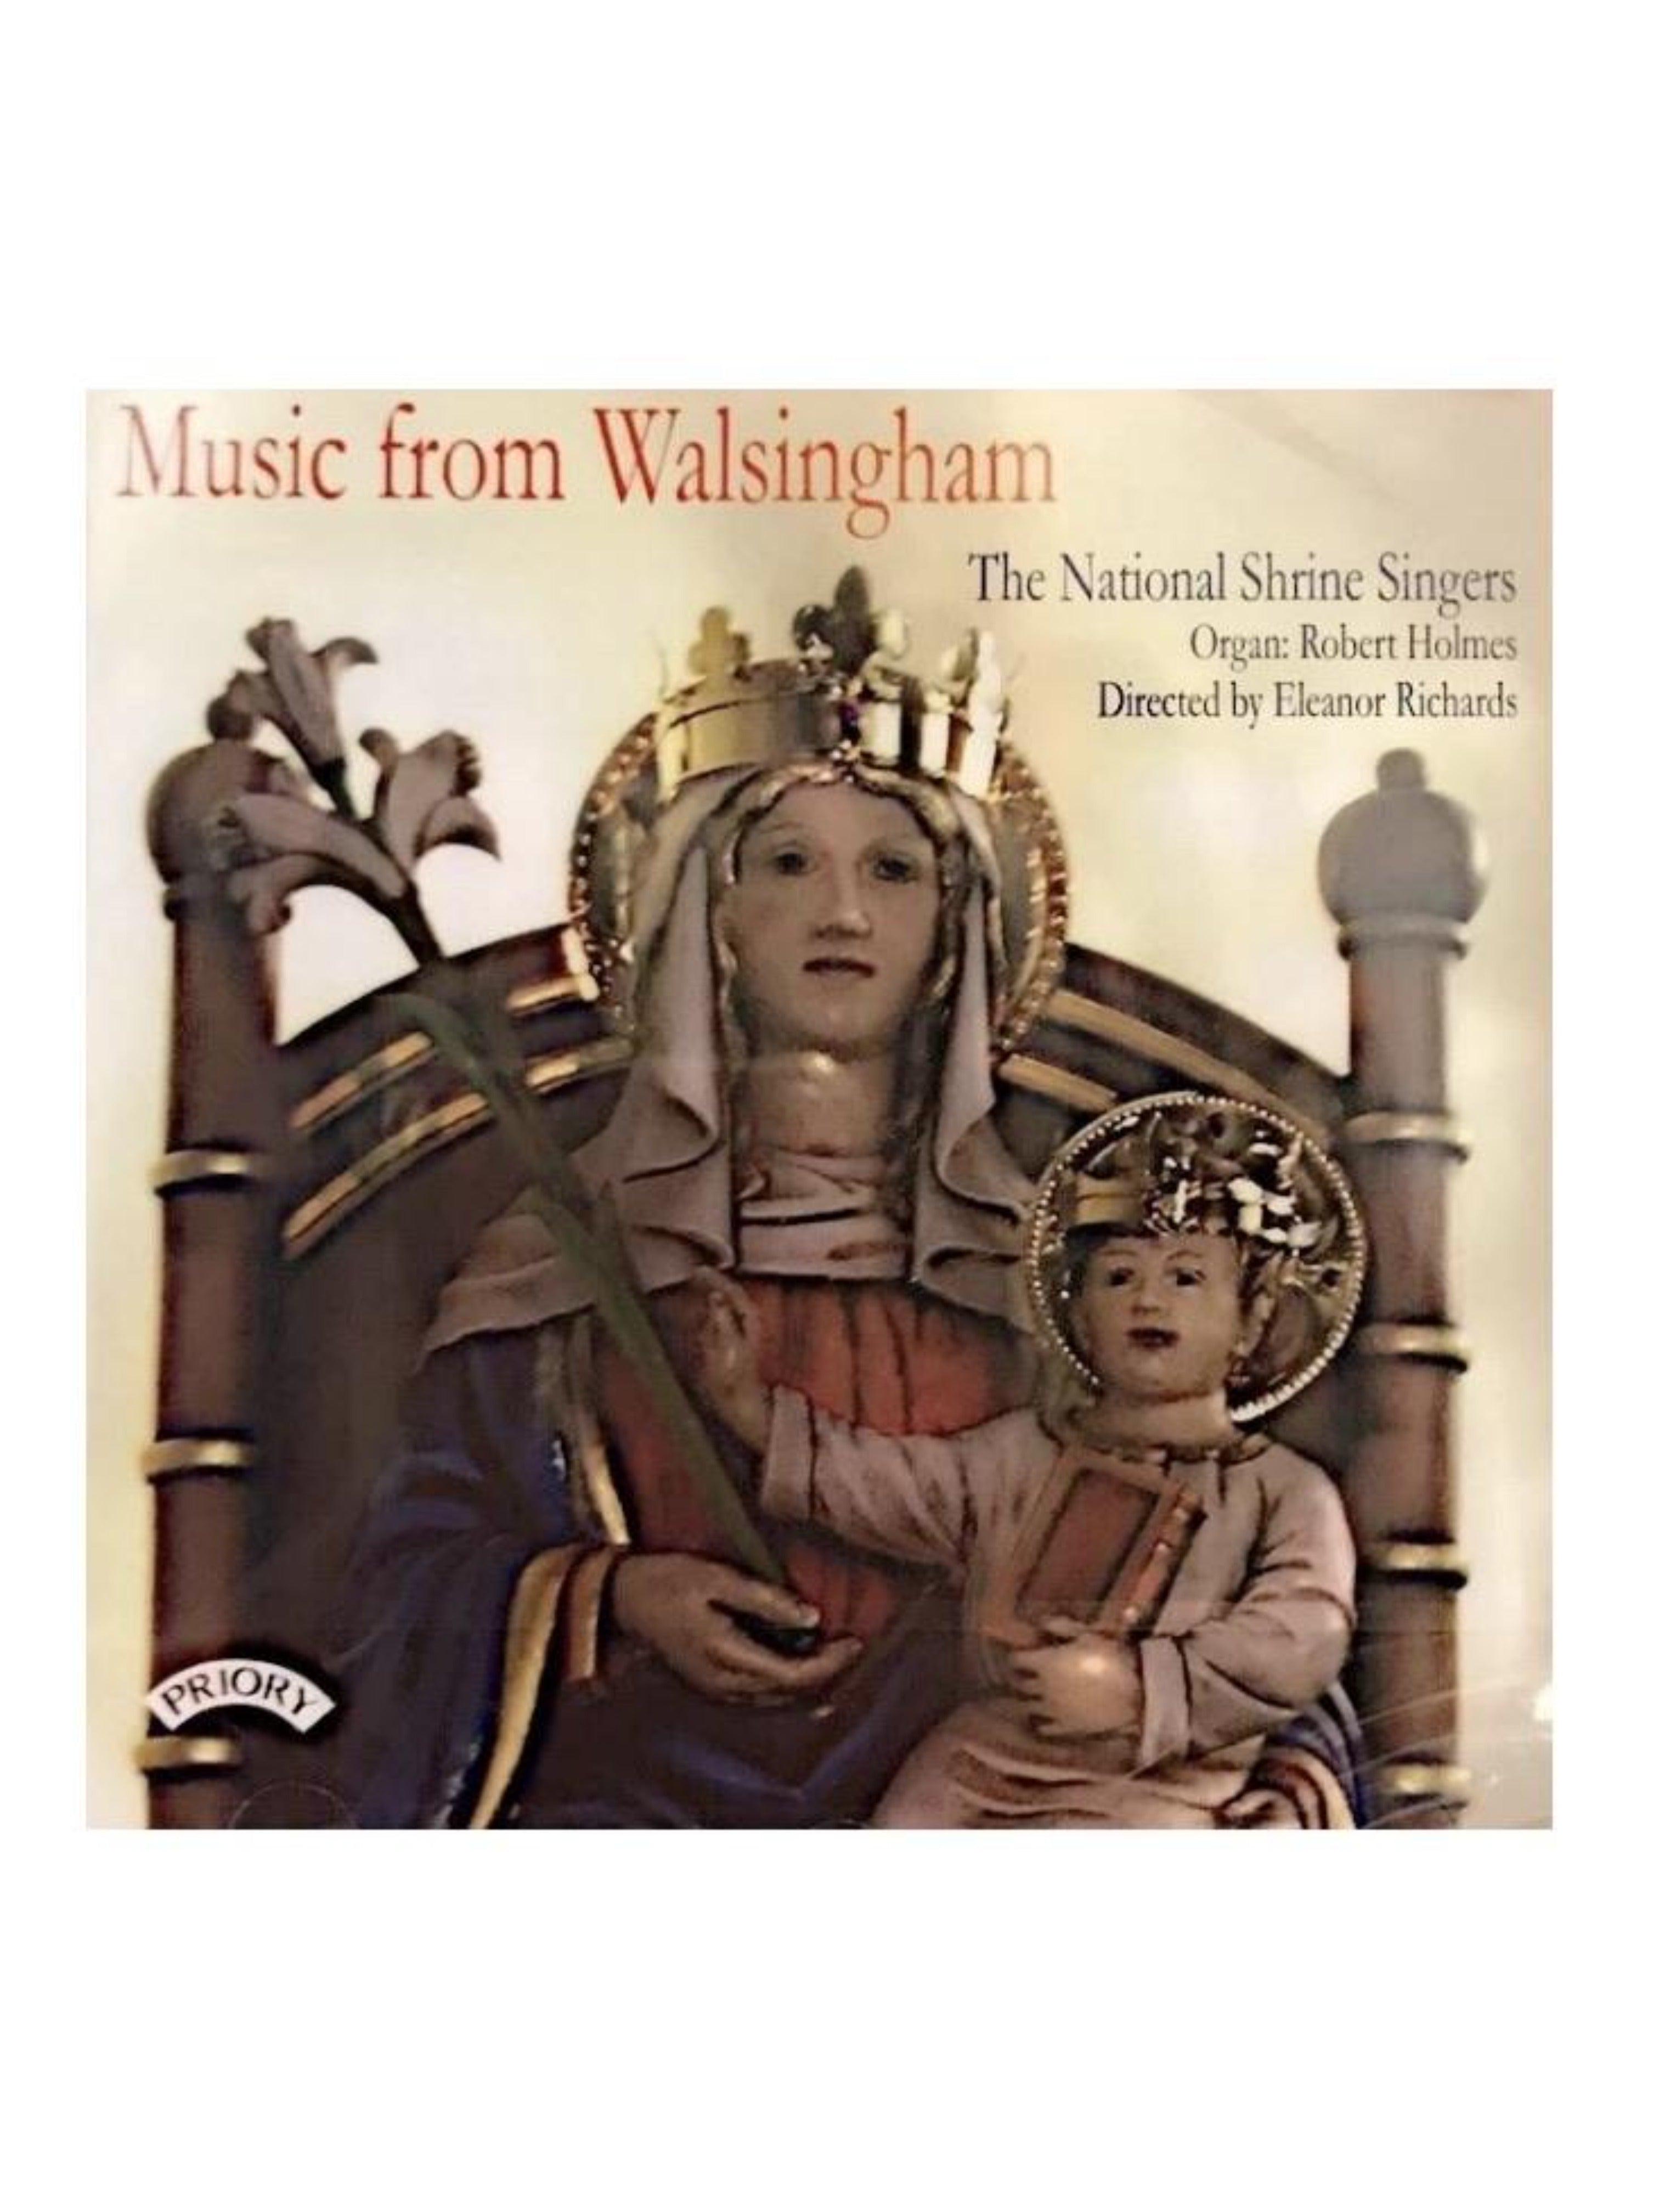 Music from Walsingham CD